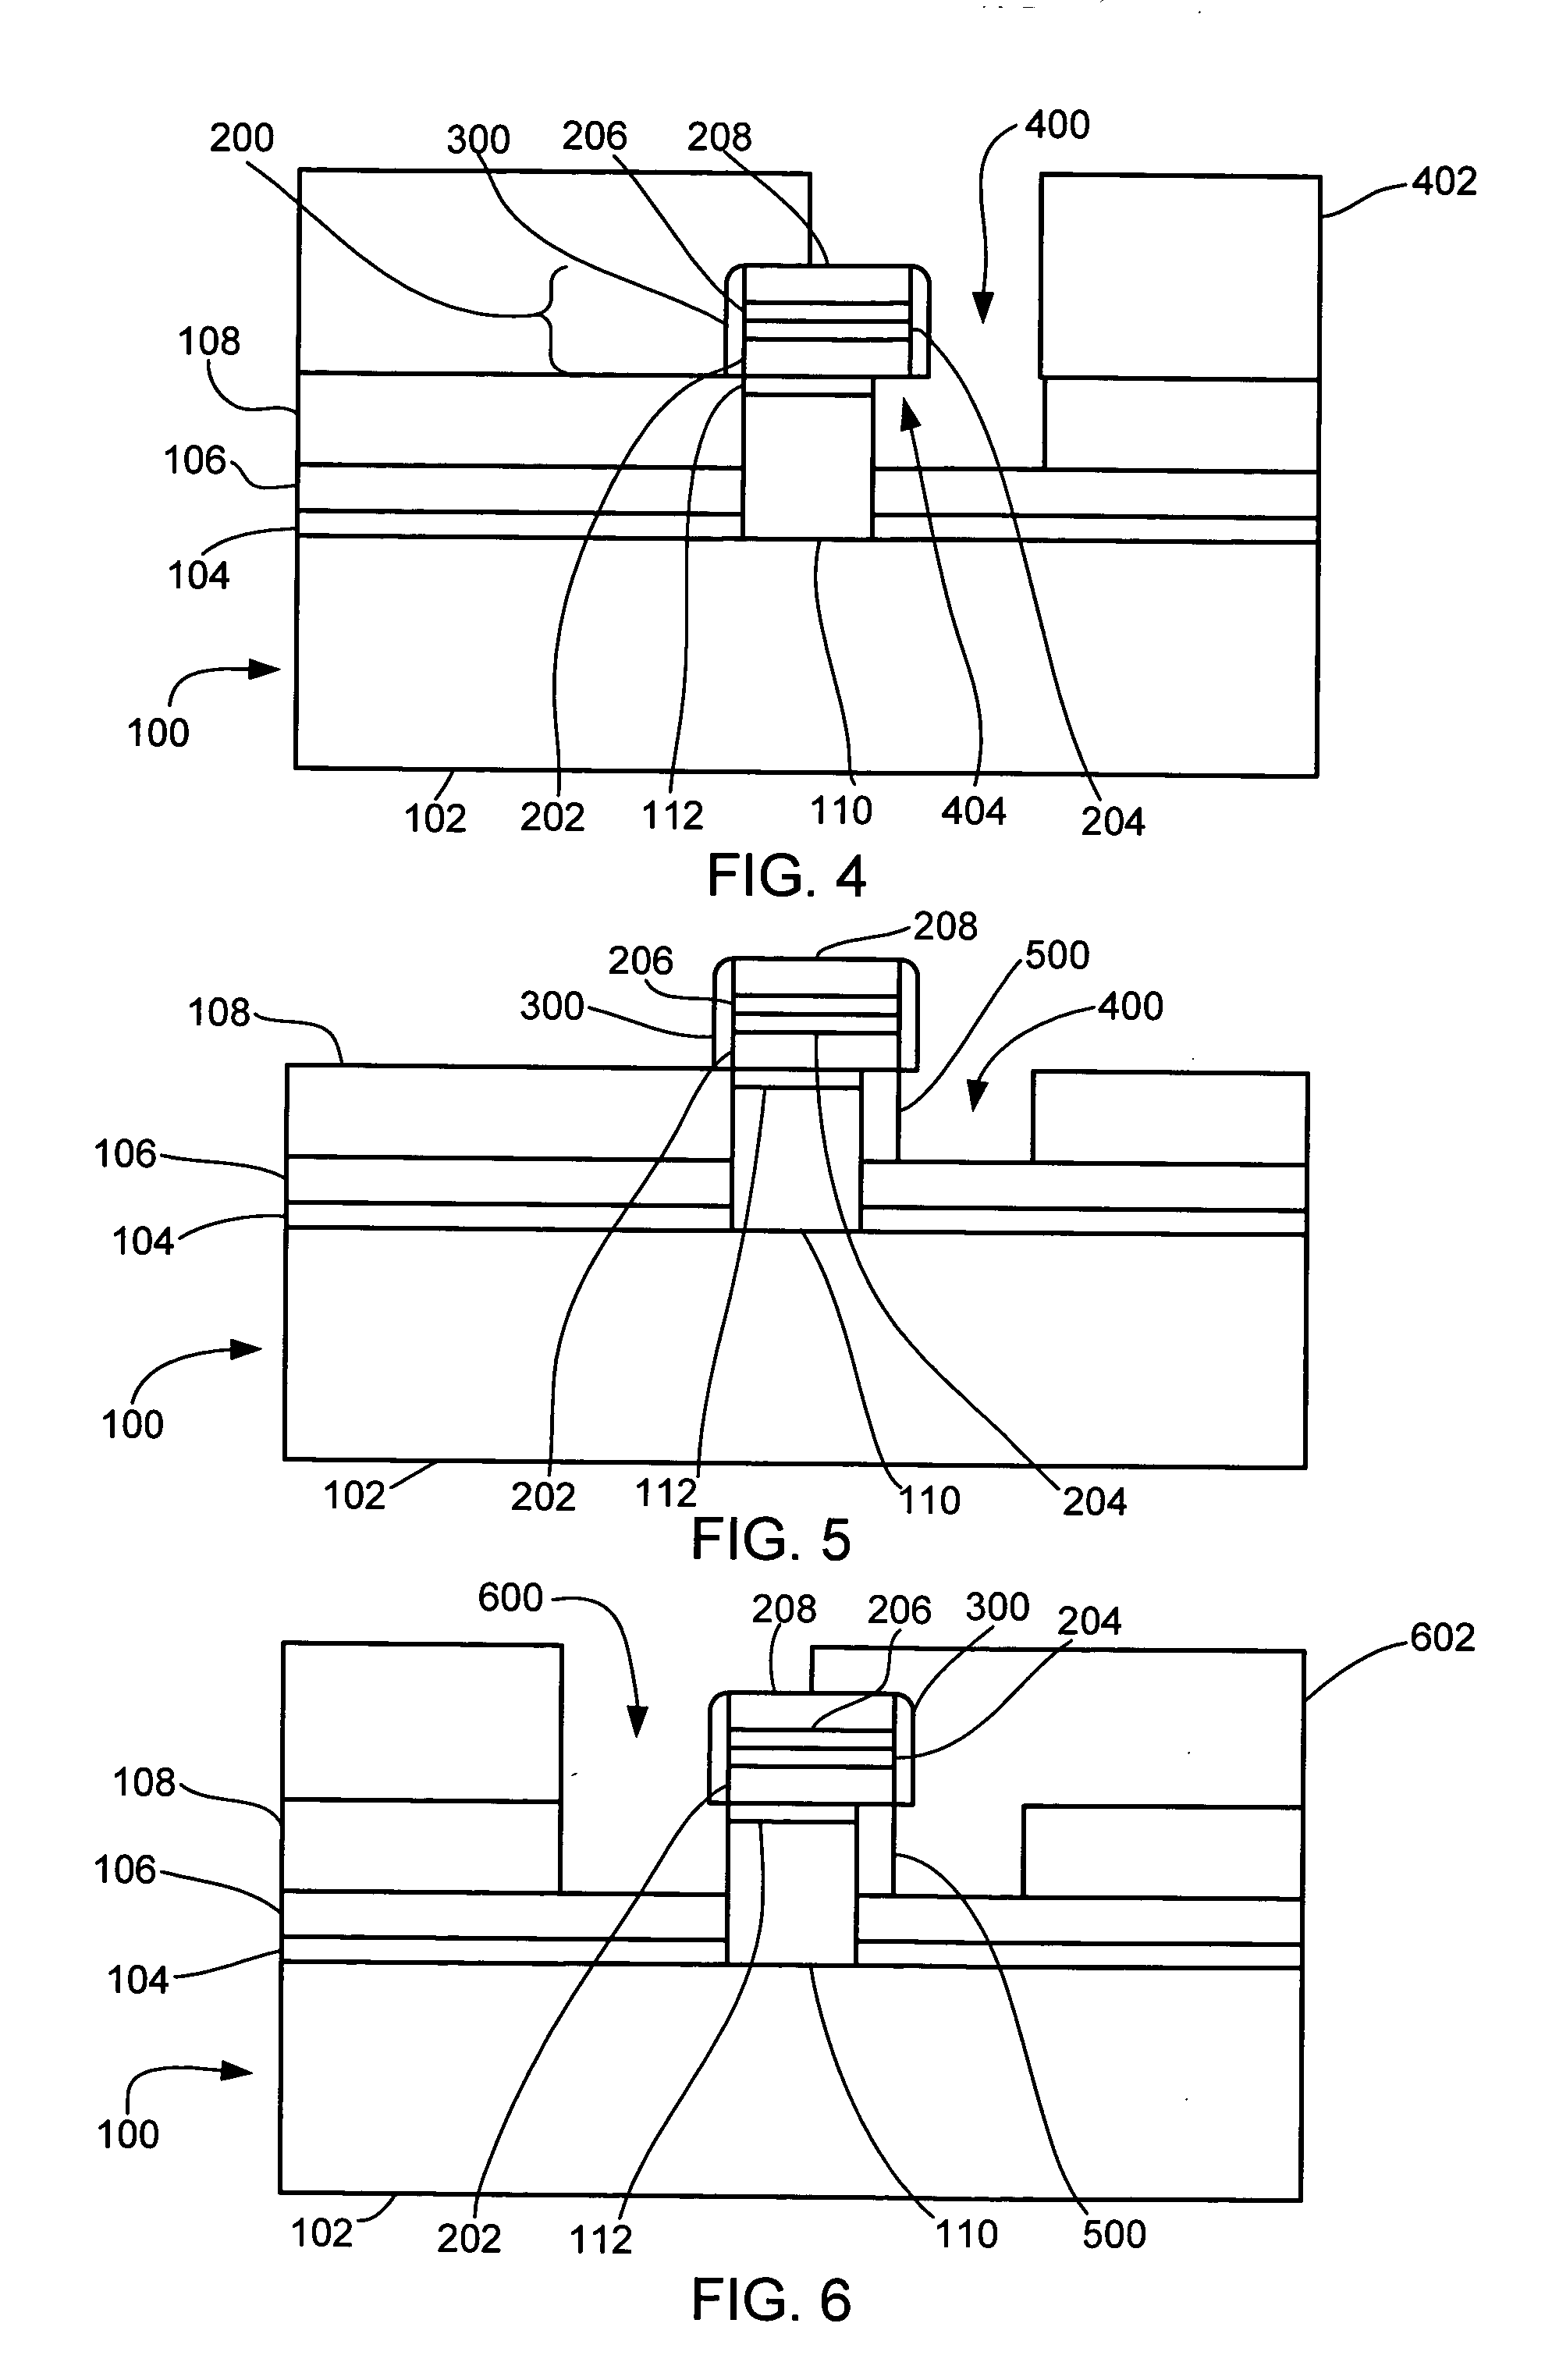 Lateral heterojunction bipolar transistor and method of manufacture using selective epitaxial growth